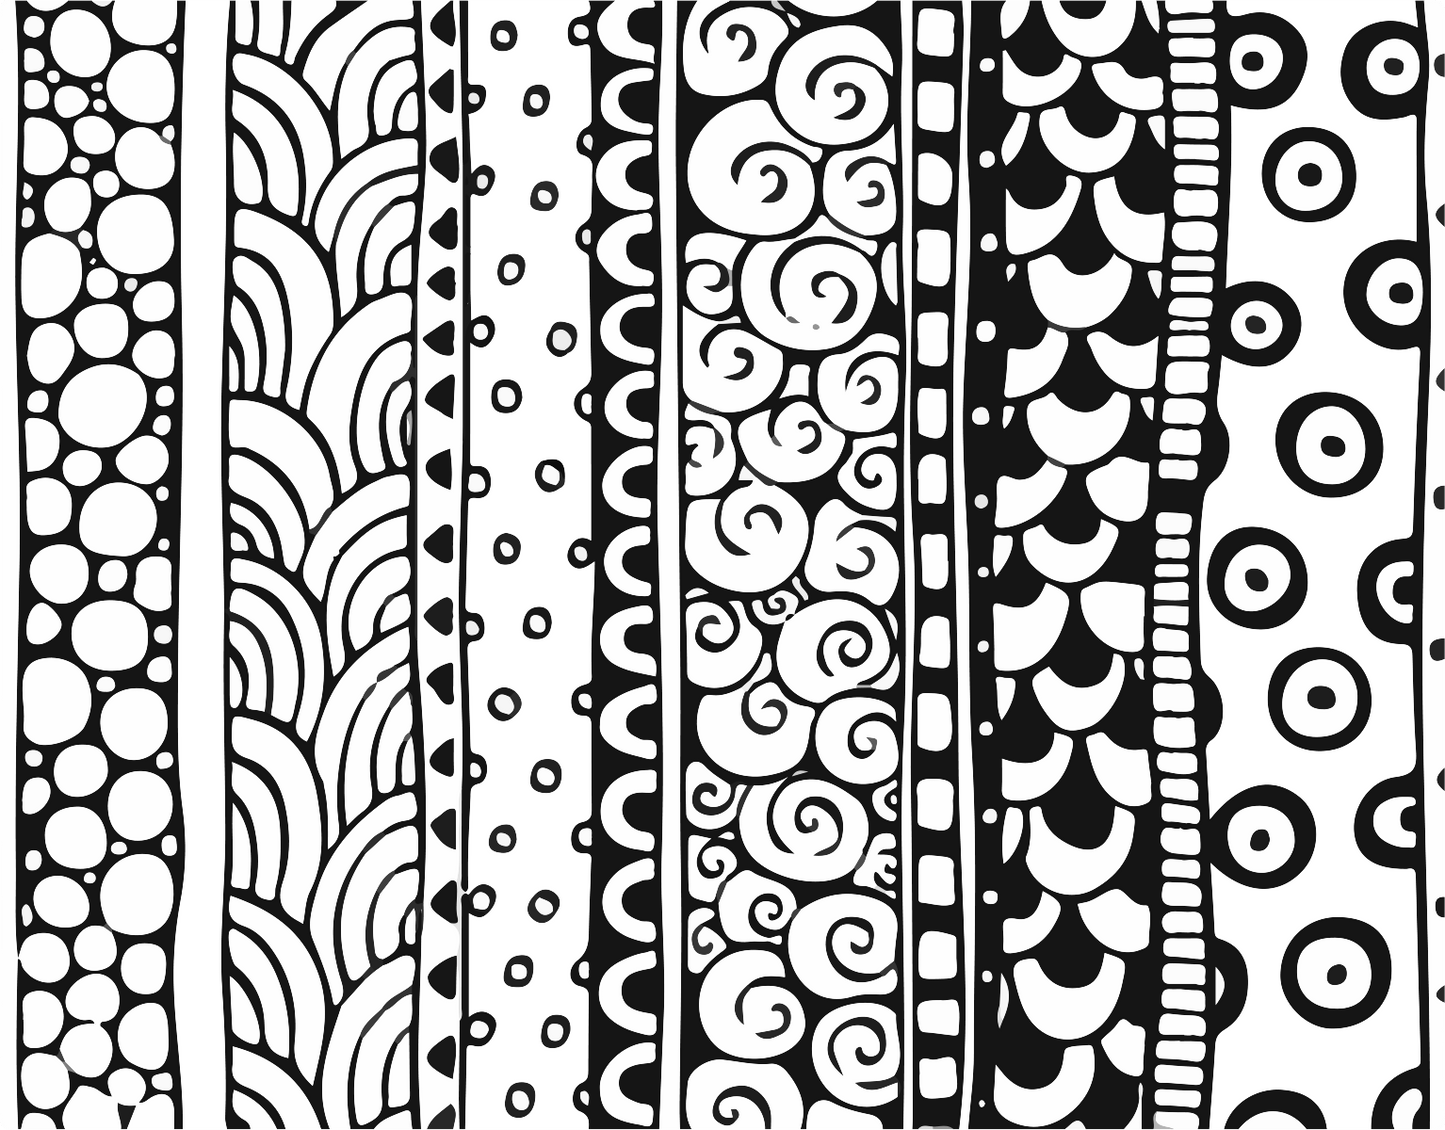 Texture Sheets / Stencil Sheets / Embossing Sheet / Silk Screen for Polymer  Clay Organic Spots Designs 